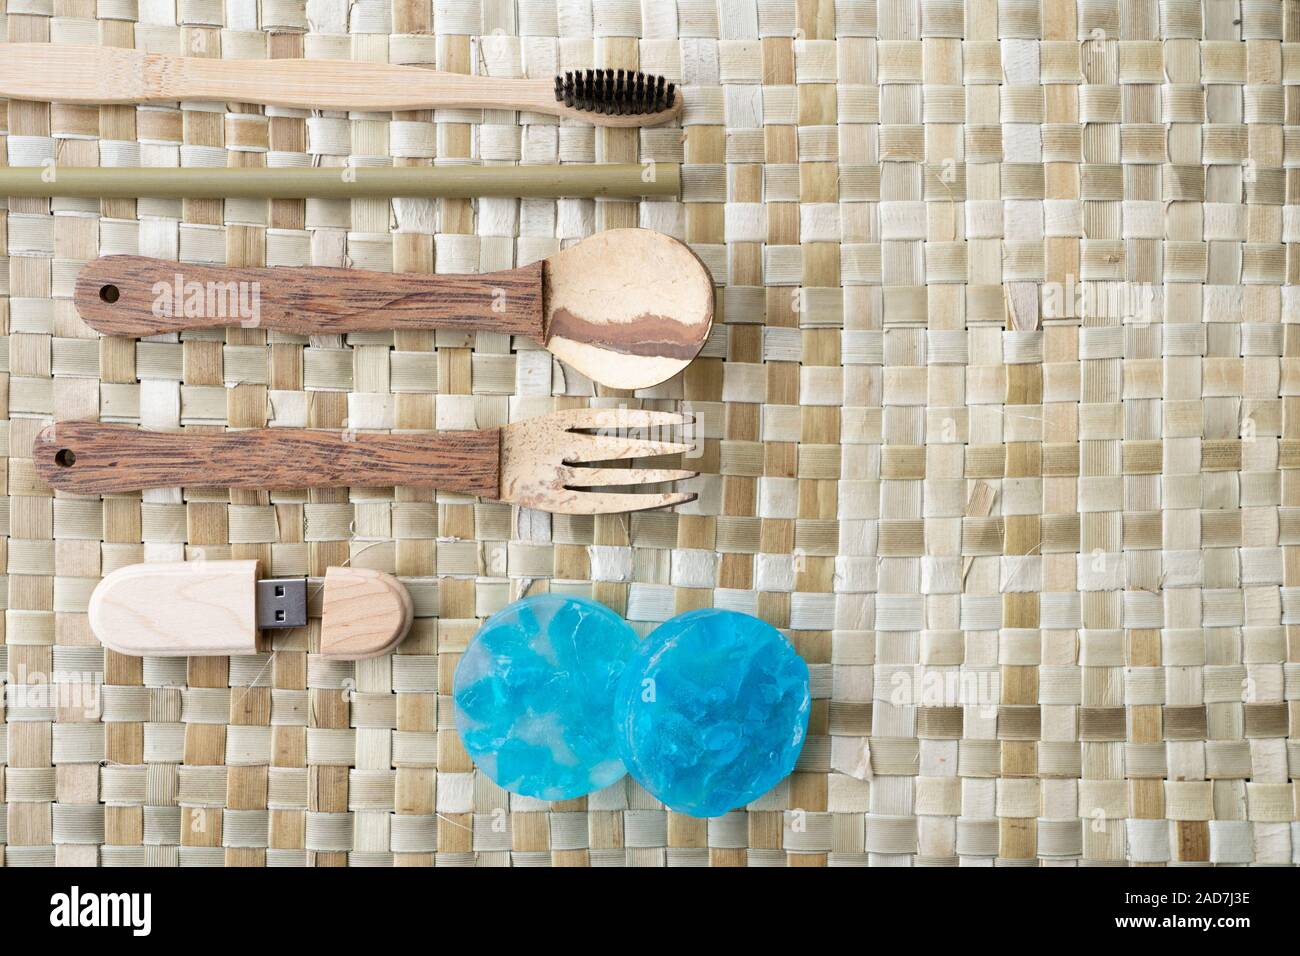 A selection of Eco-friendly travel utensils made in the Philippines. Listed items being a fork,spoon made out of coconut tree wood.A toothbrush & USB Stock Photo